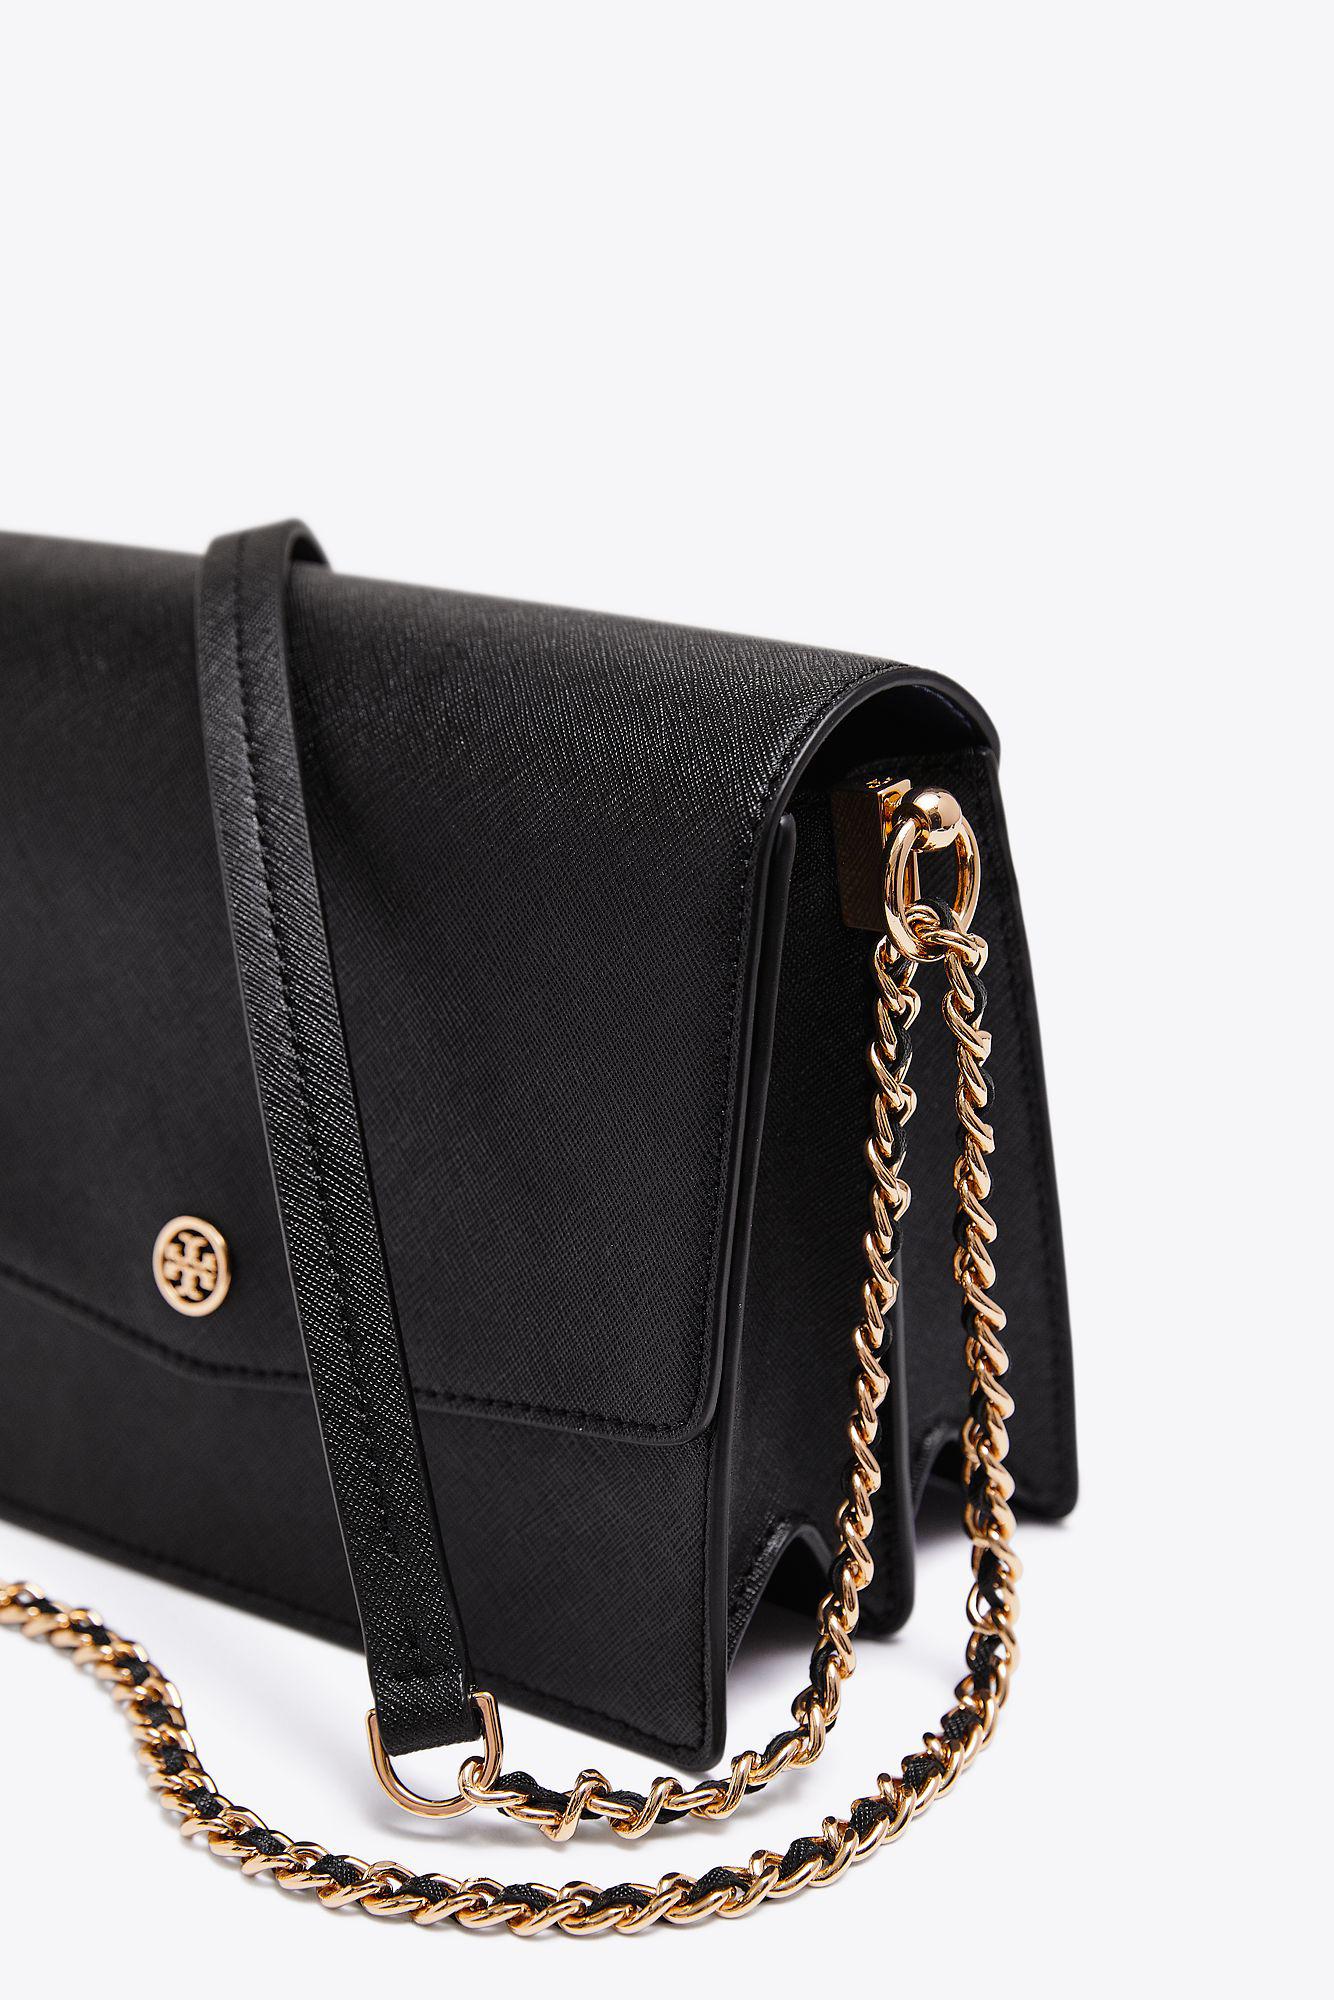 Tory Burch Leather Robinson Convertible Shoulder Bag in Black - Lyst